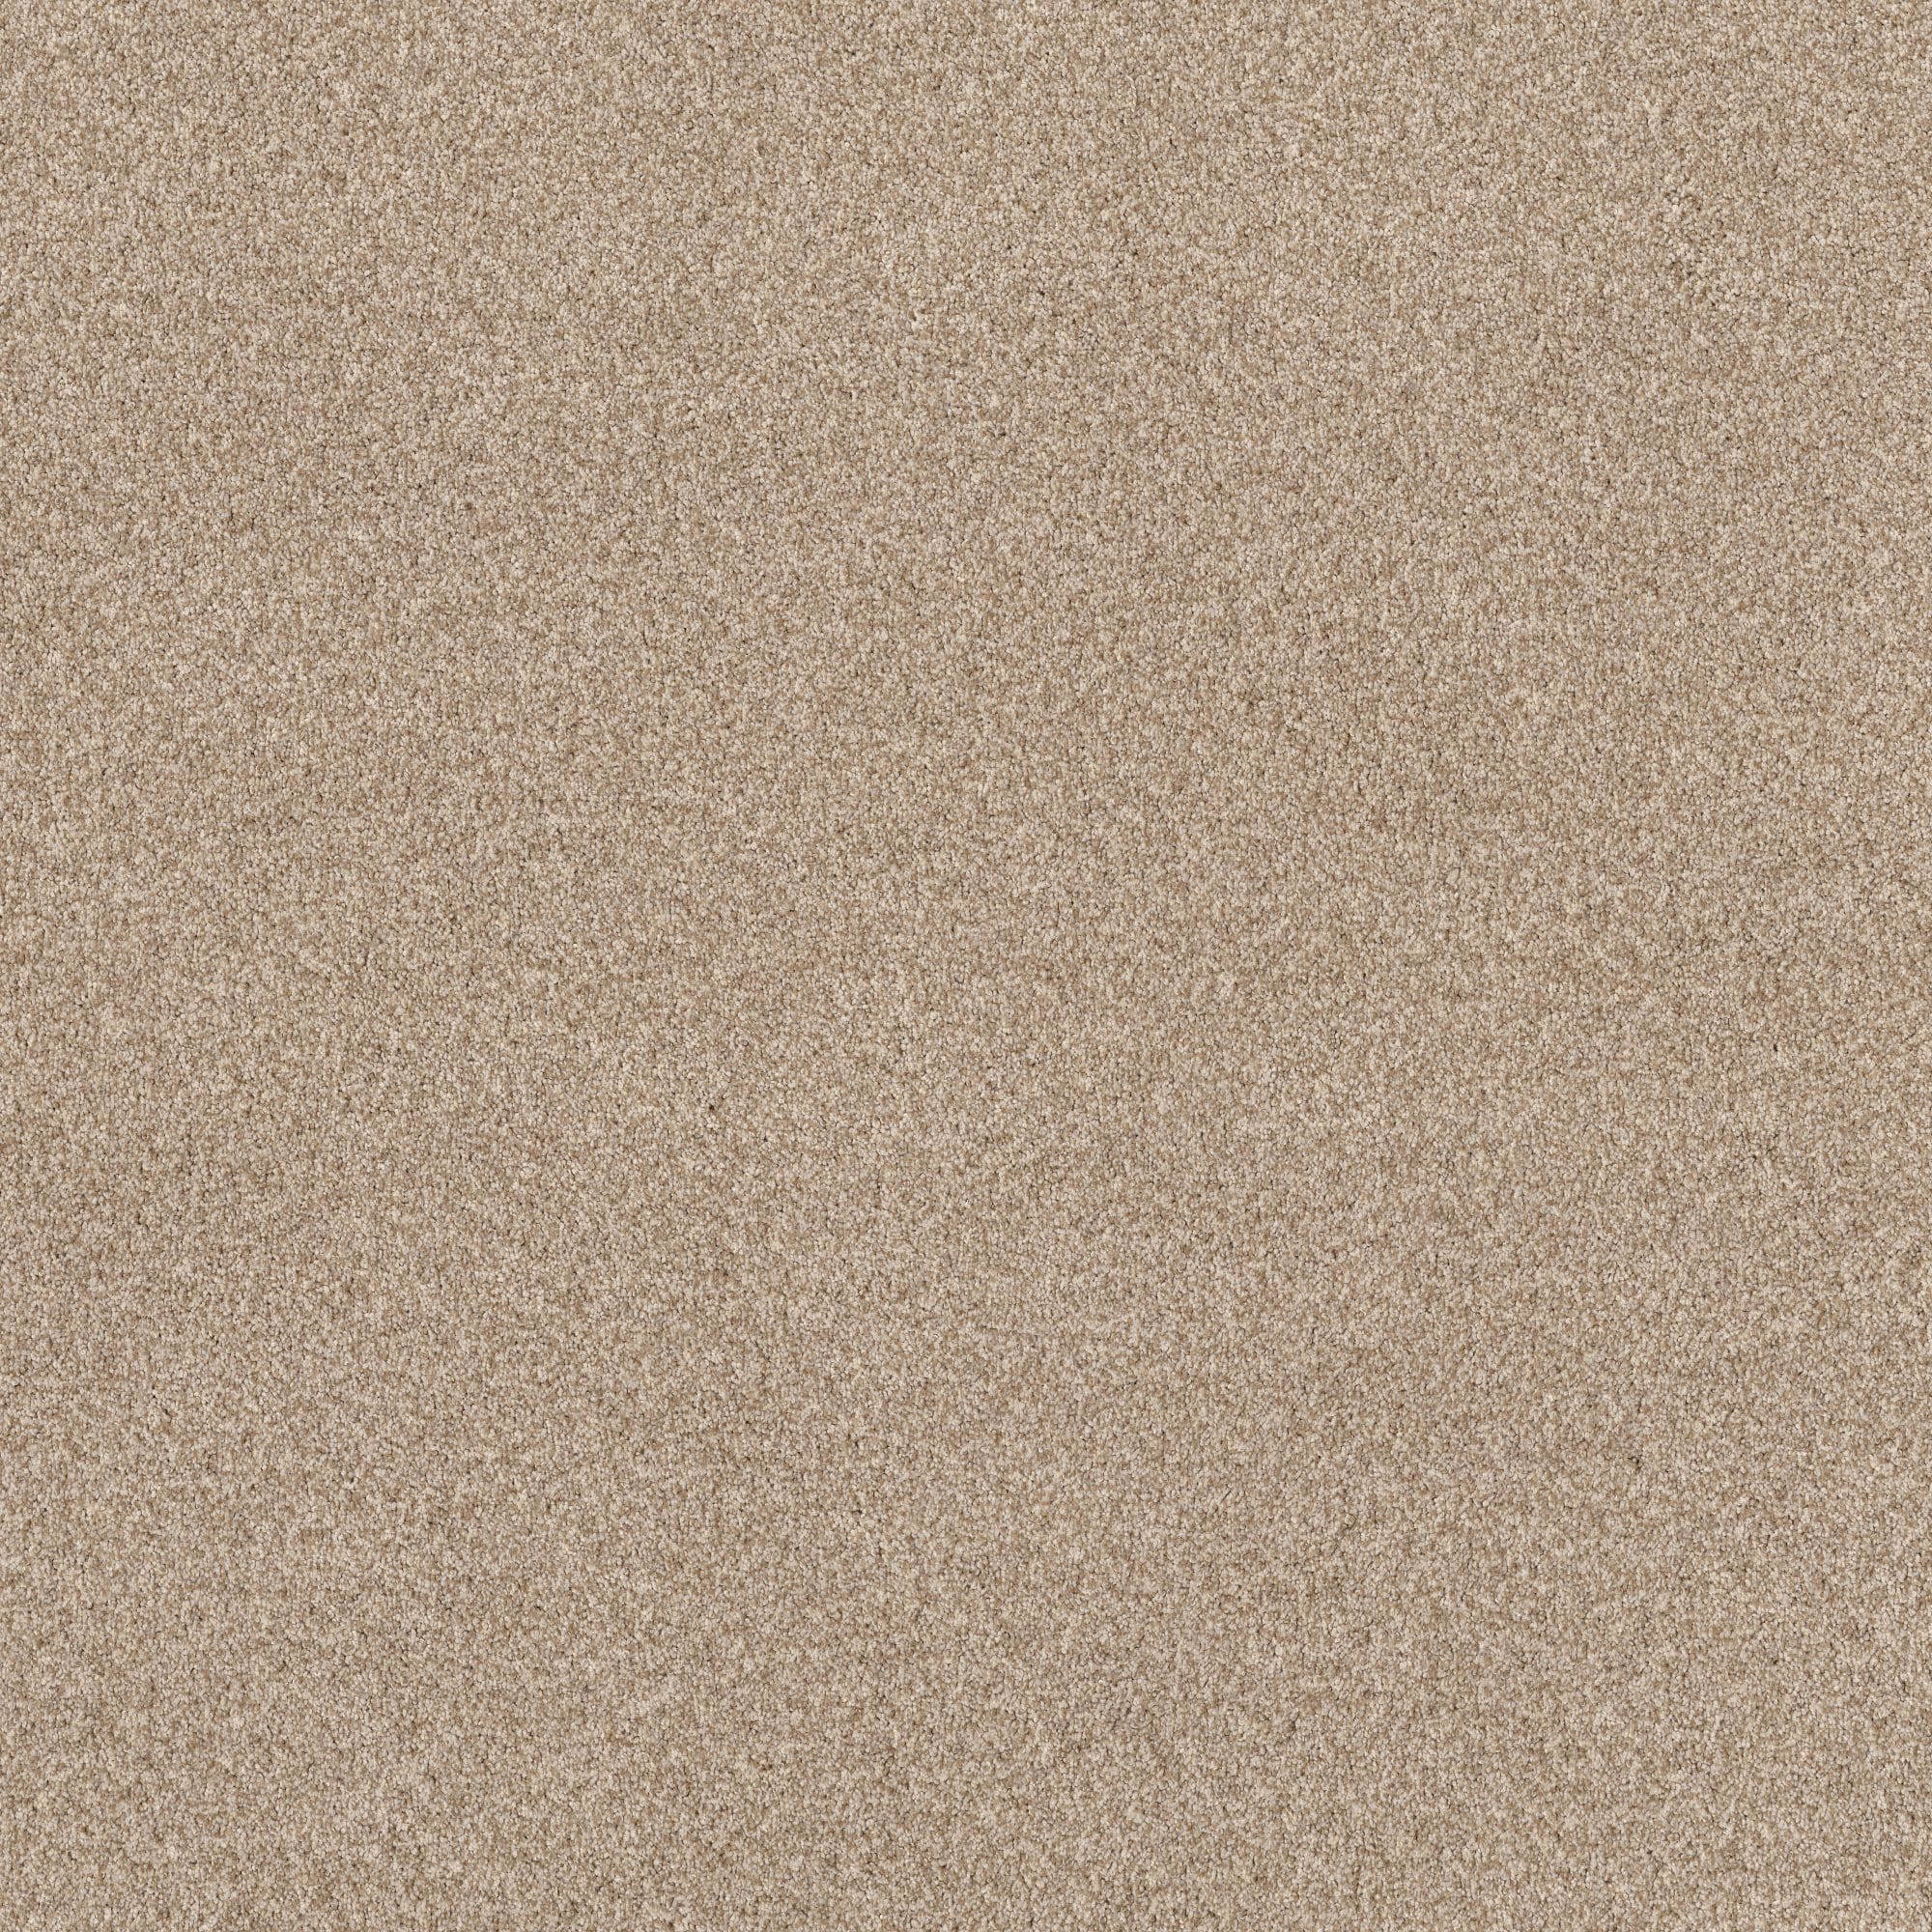 STAINMASTER PetProtect Beach in Carpet the at Textured department Carpet Grass Indoor Reverie II